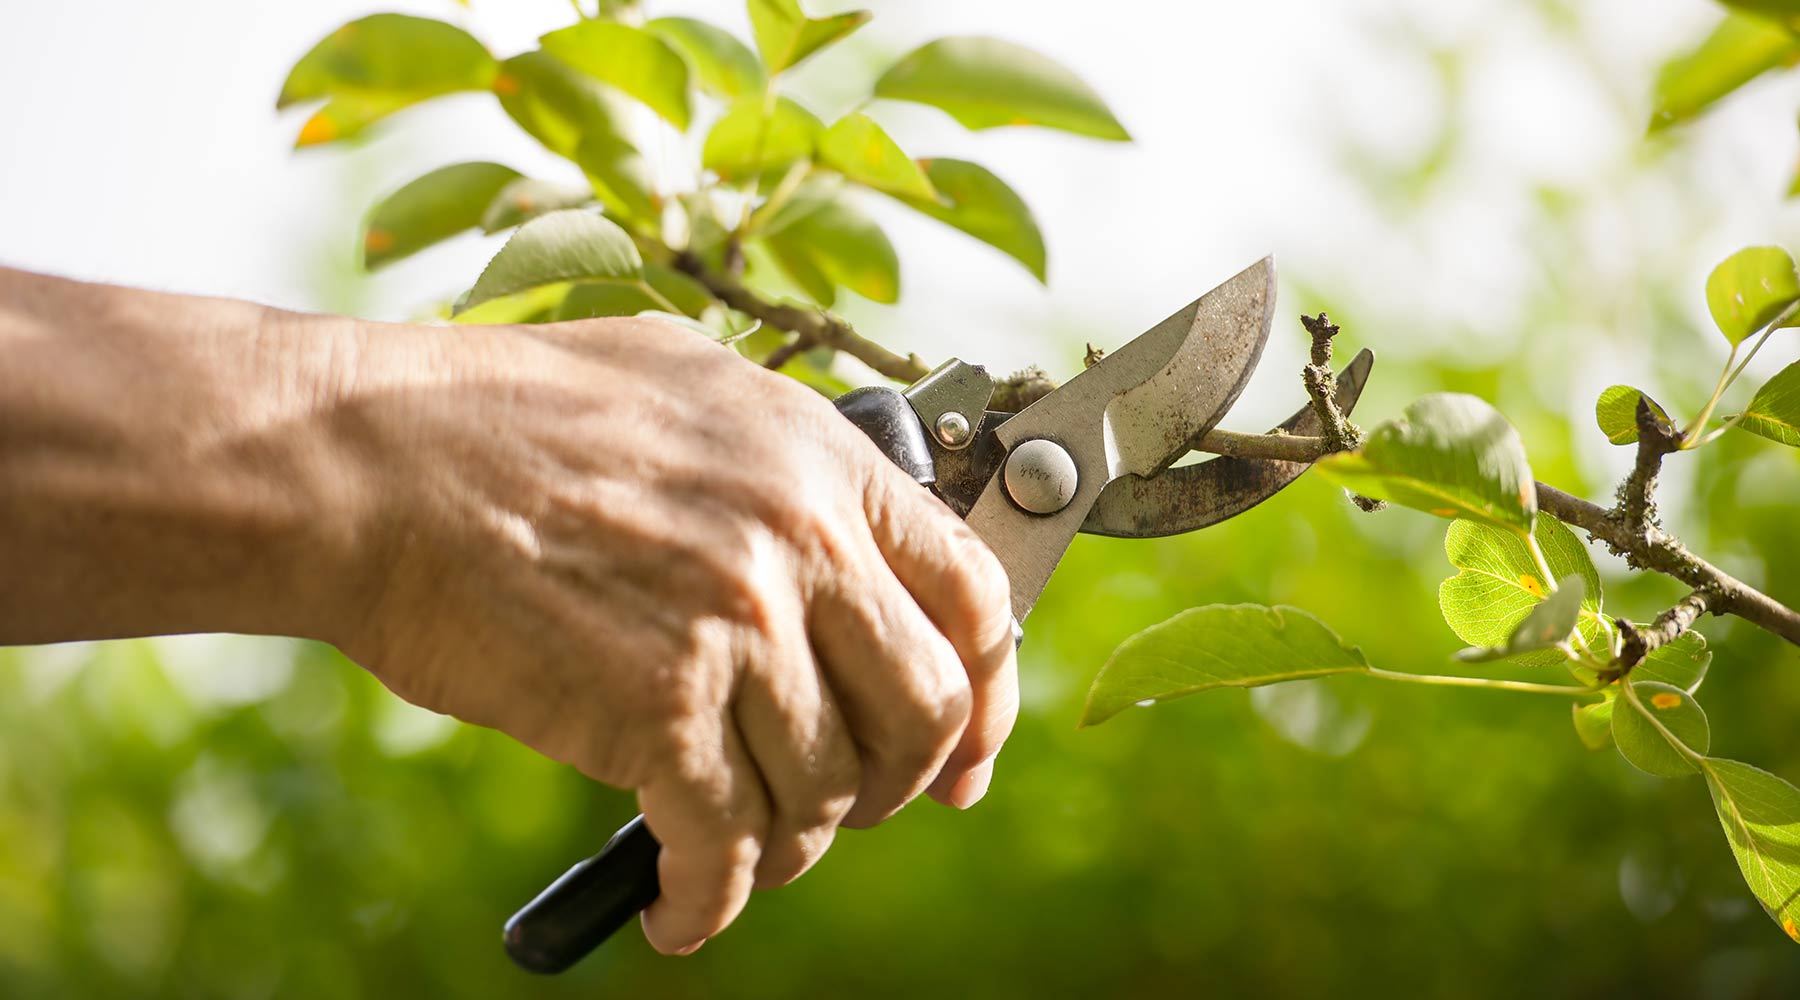 gardening and agricultural shears and scissors